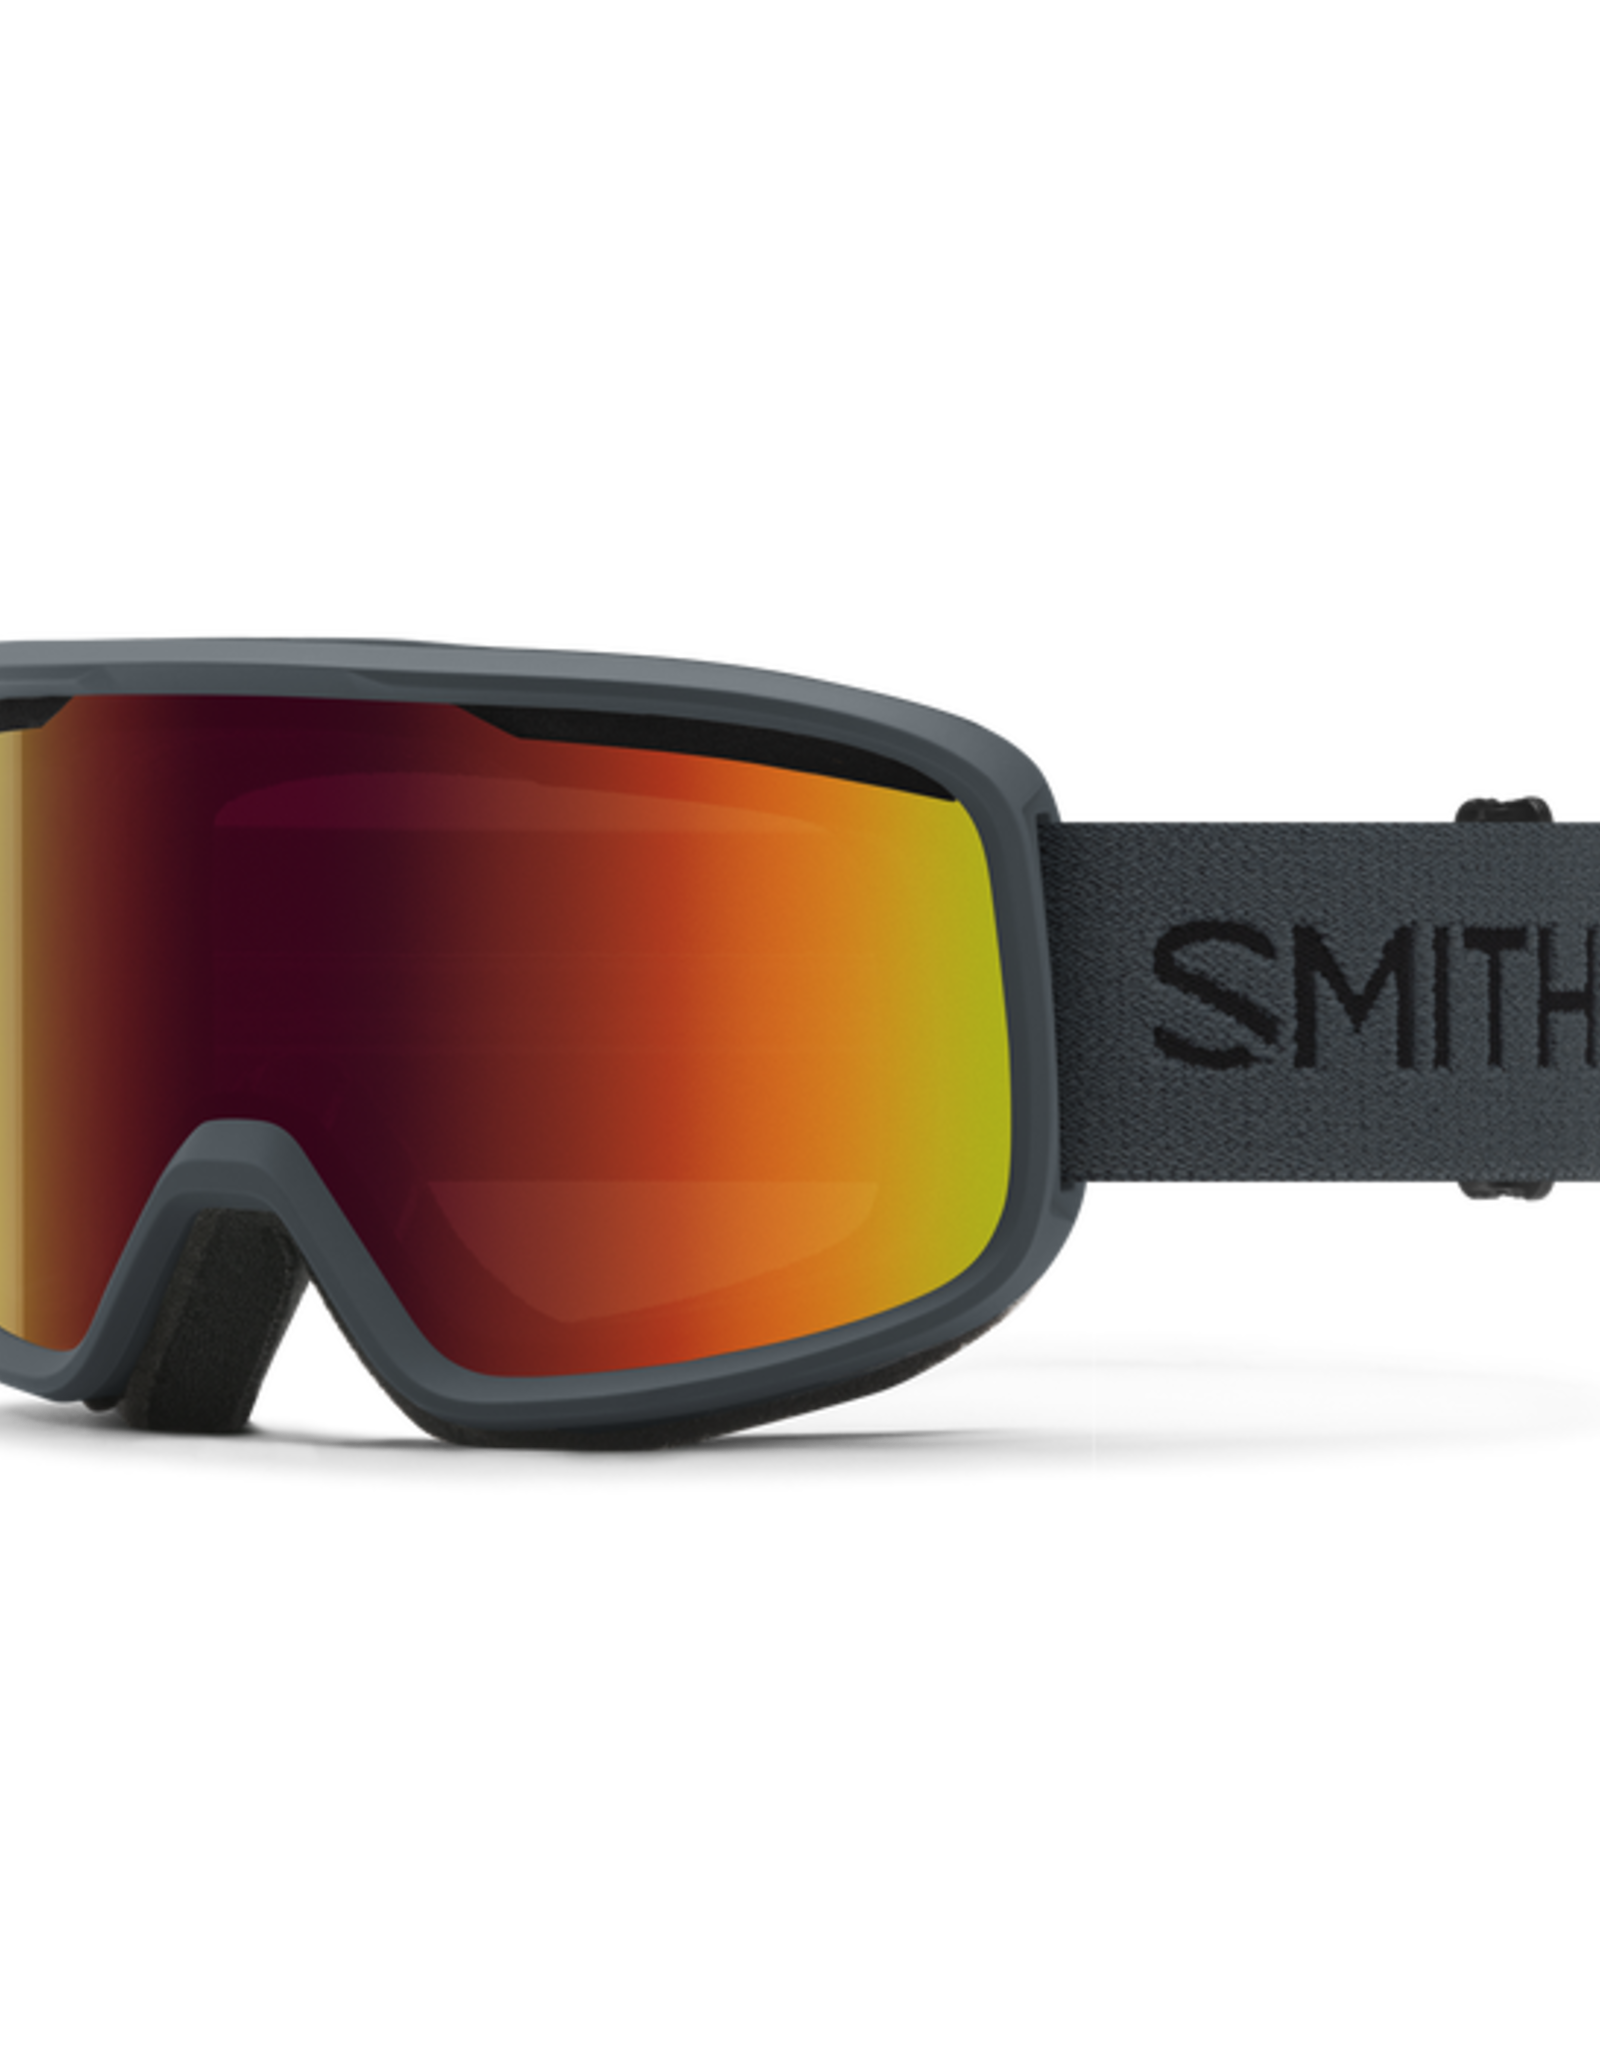 SMITH Smith Frontier Slate w Red Sol-X Mirror Lens